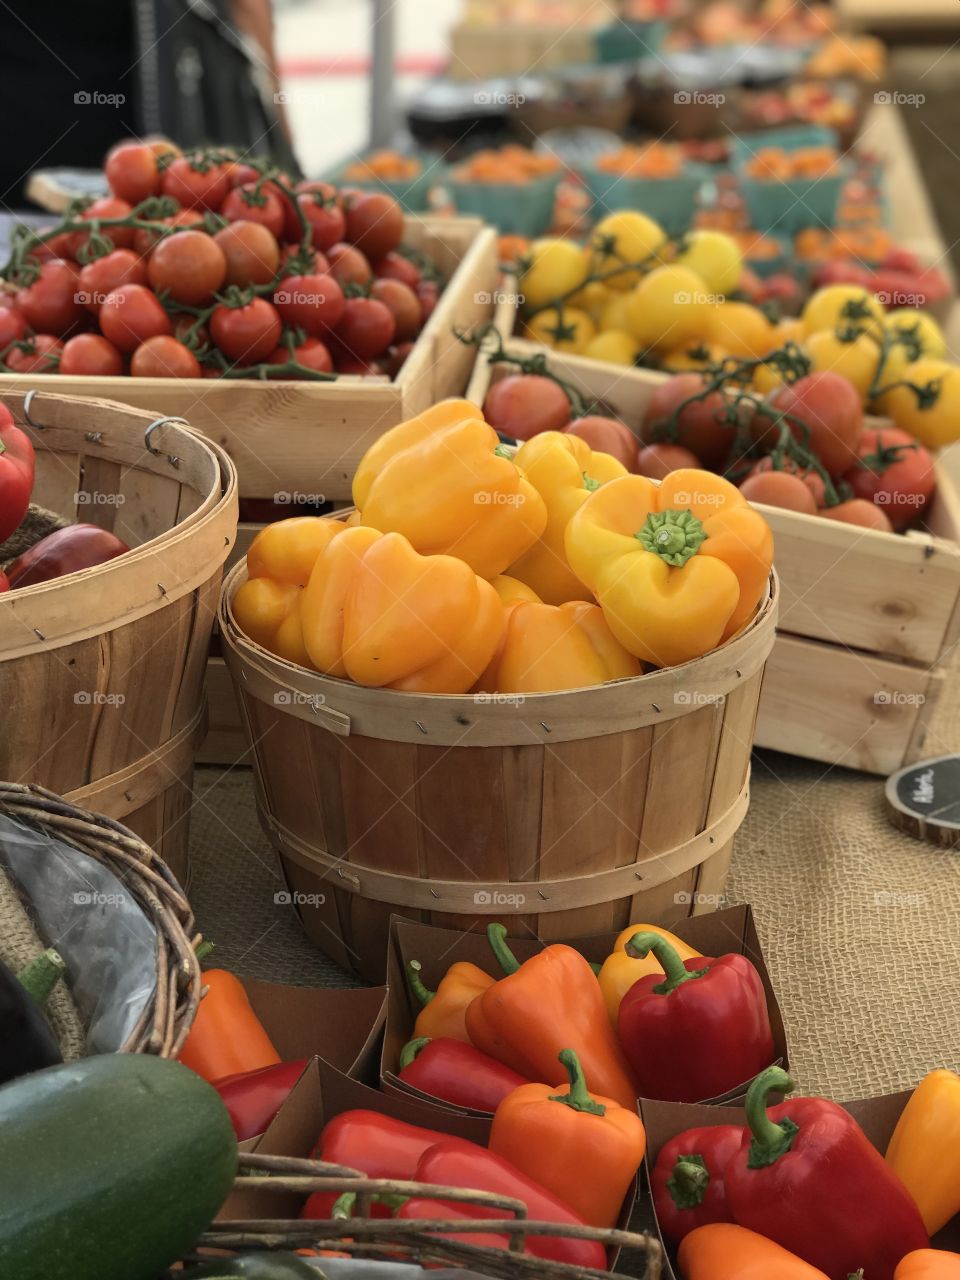 The Banff Farmers Market is full of color and wonderful aromas.  Baskets of fresh veggies are waiting to be selected...